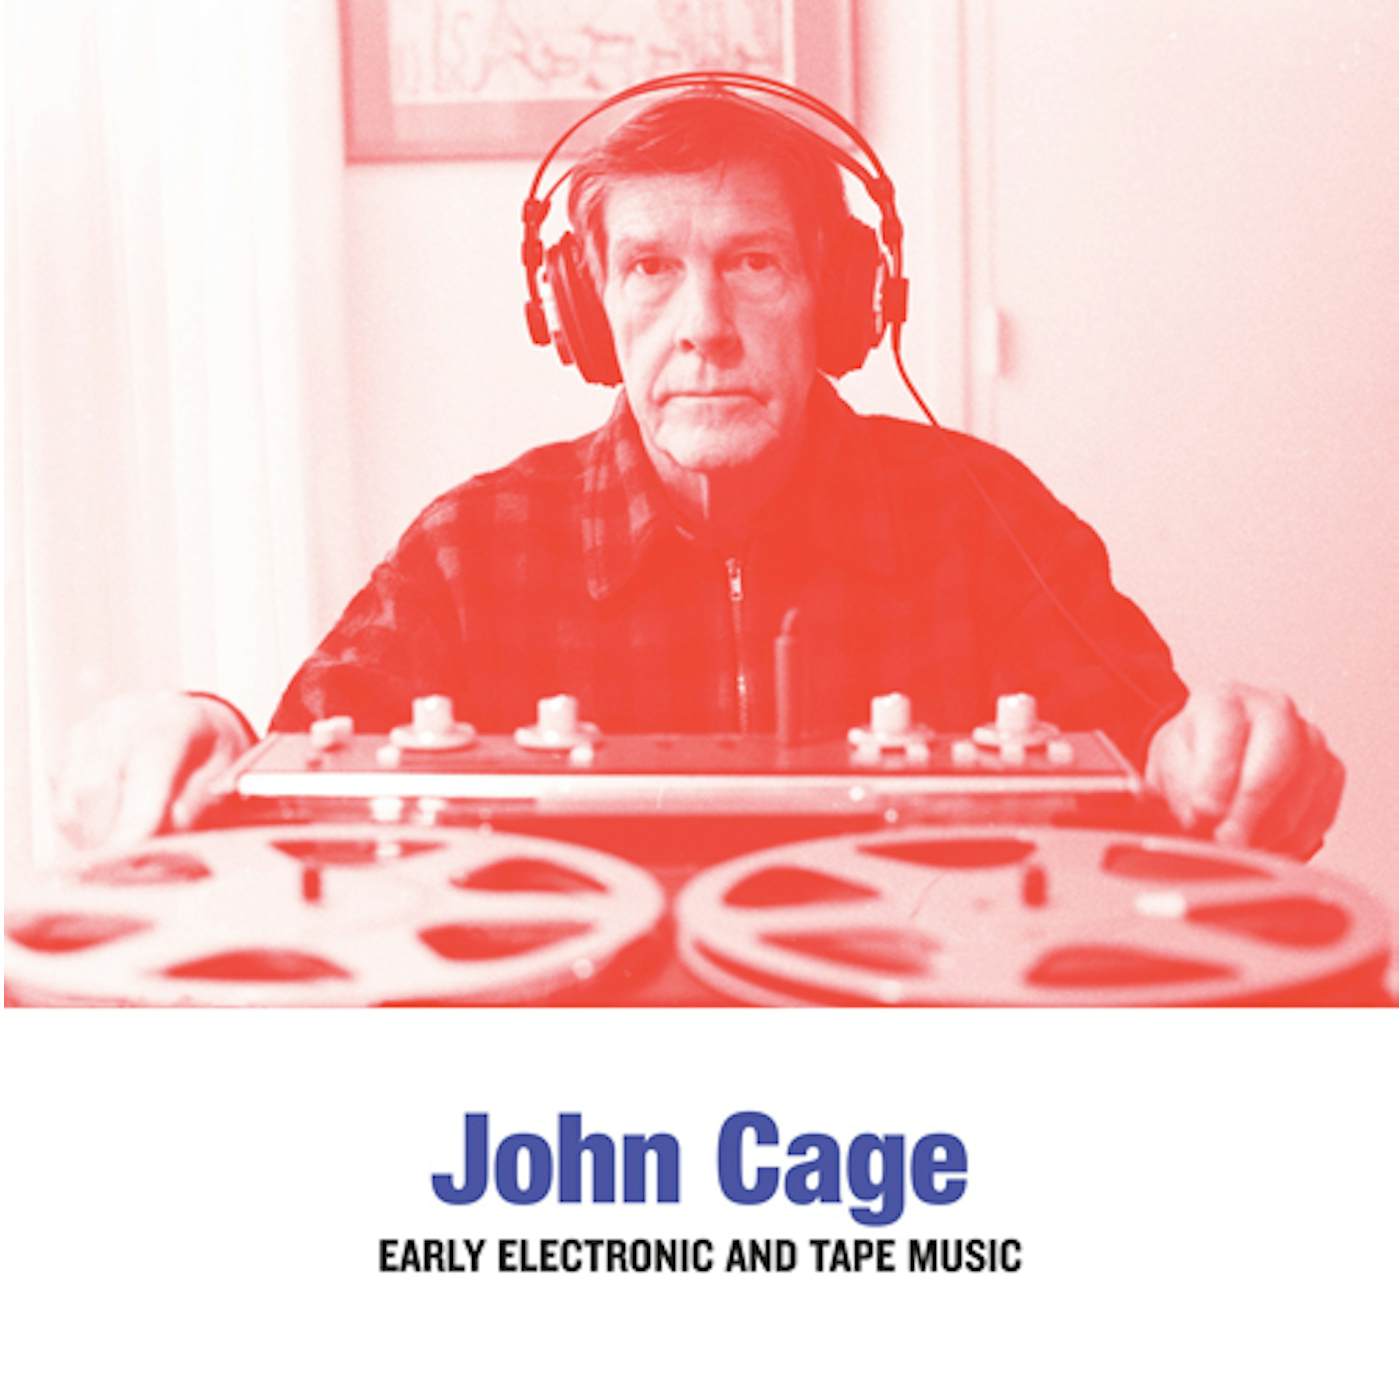 John Cage EARLY ELECTRONIC AND TAPE MUSIC CD